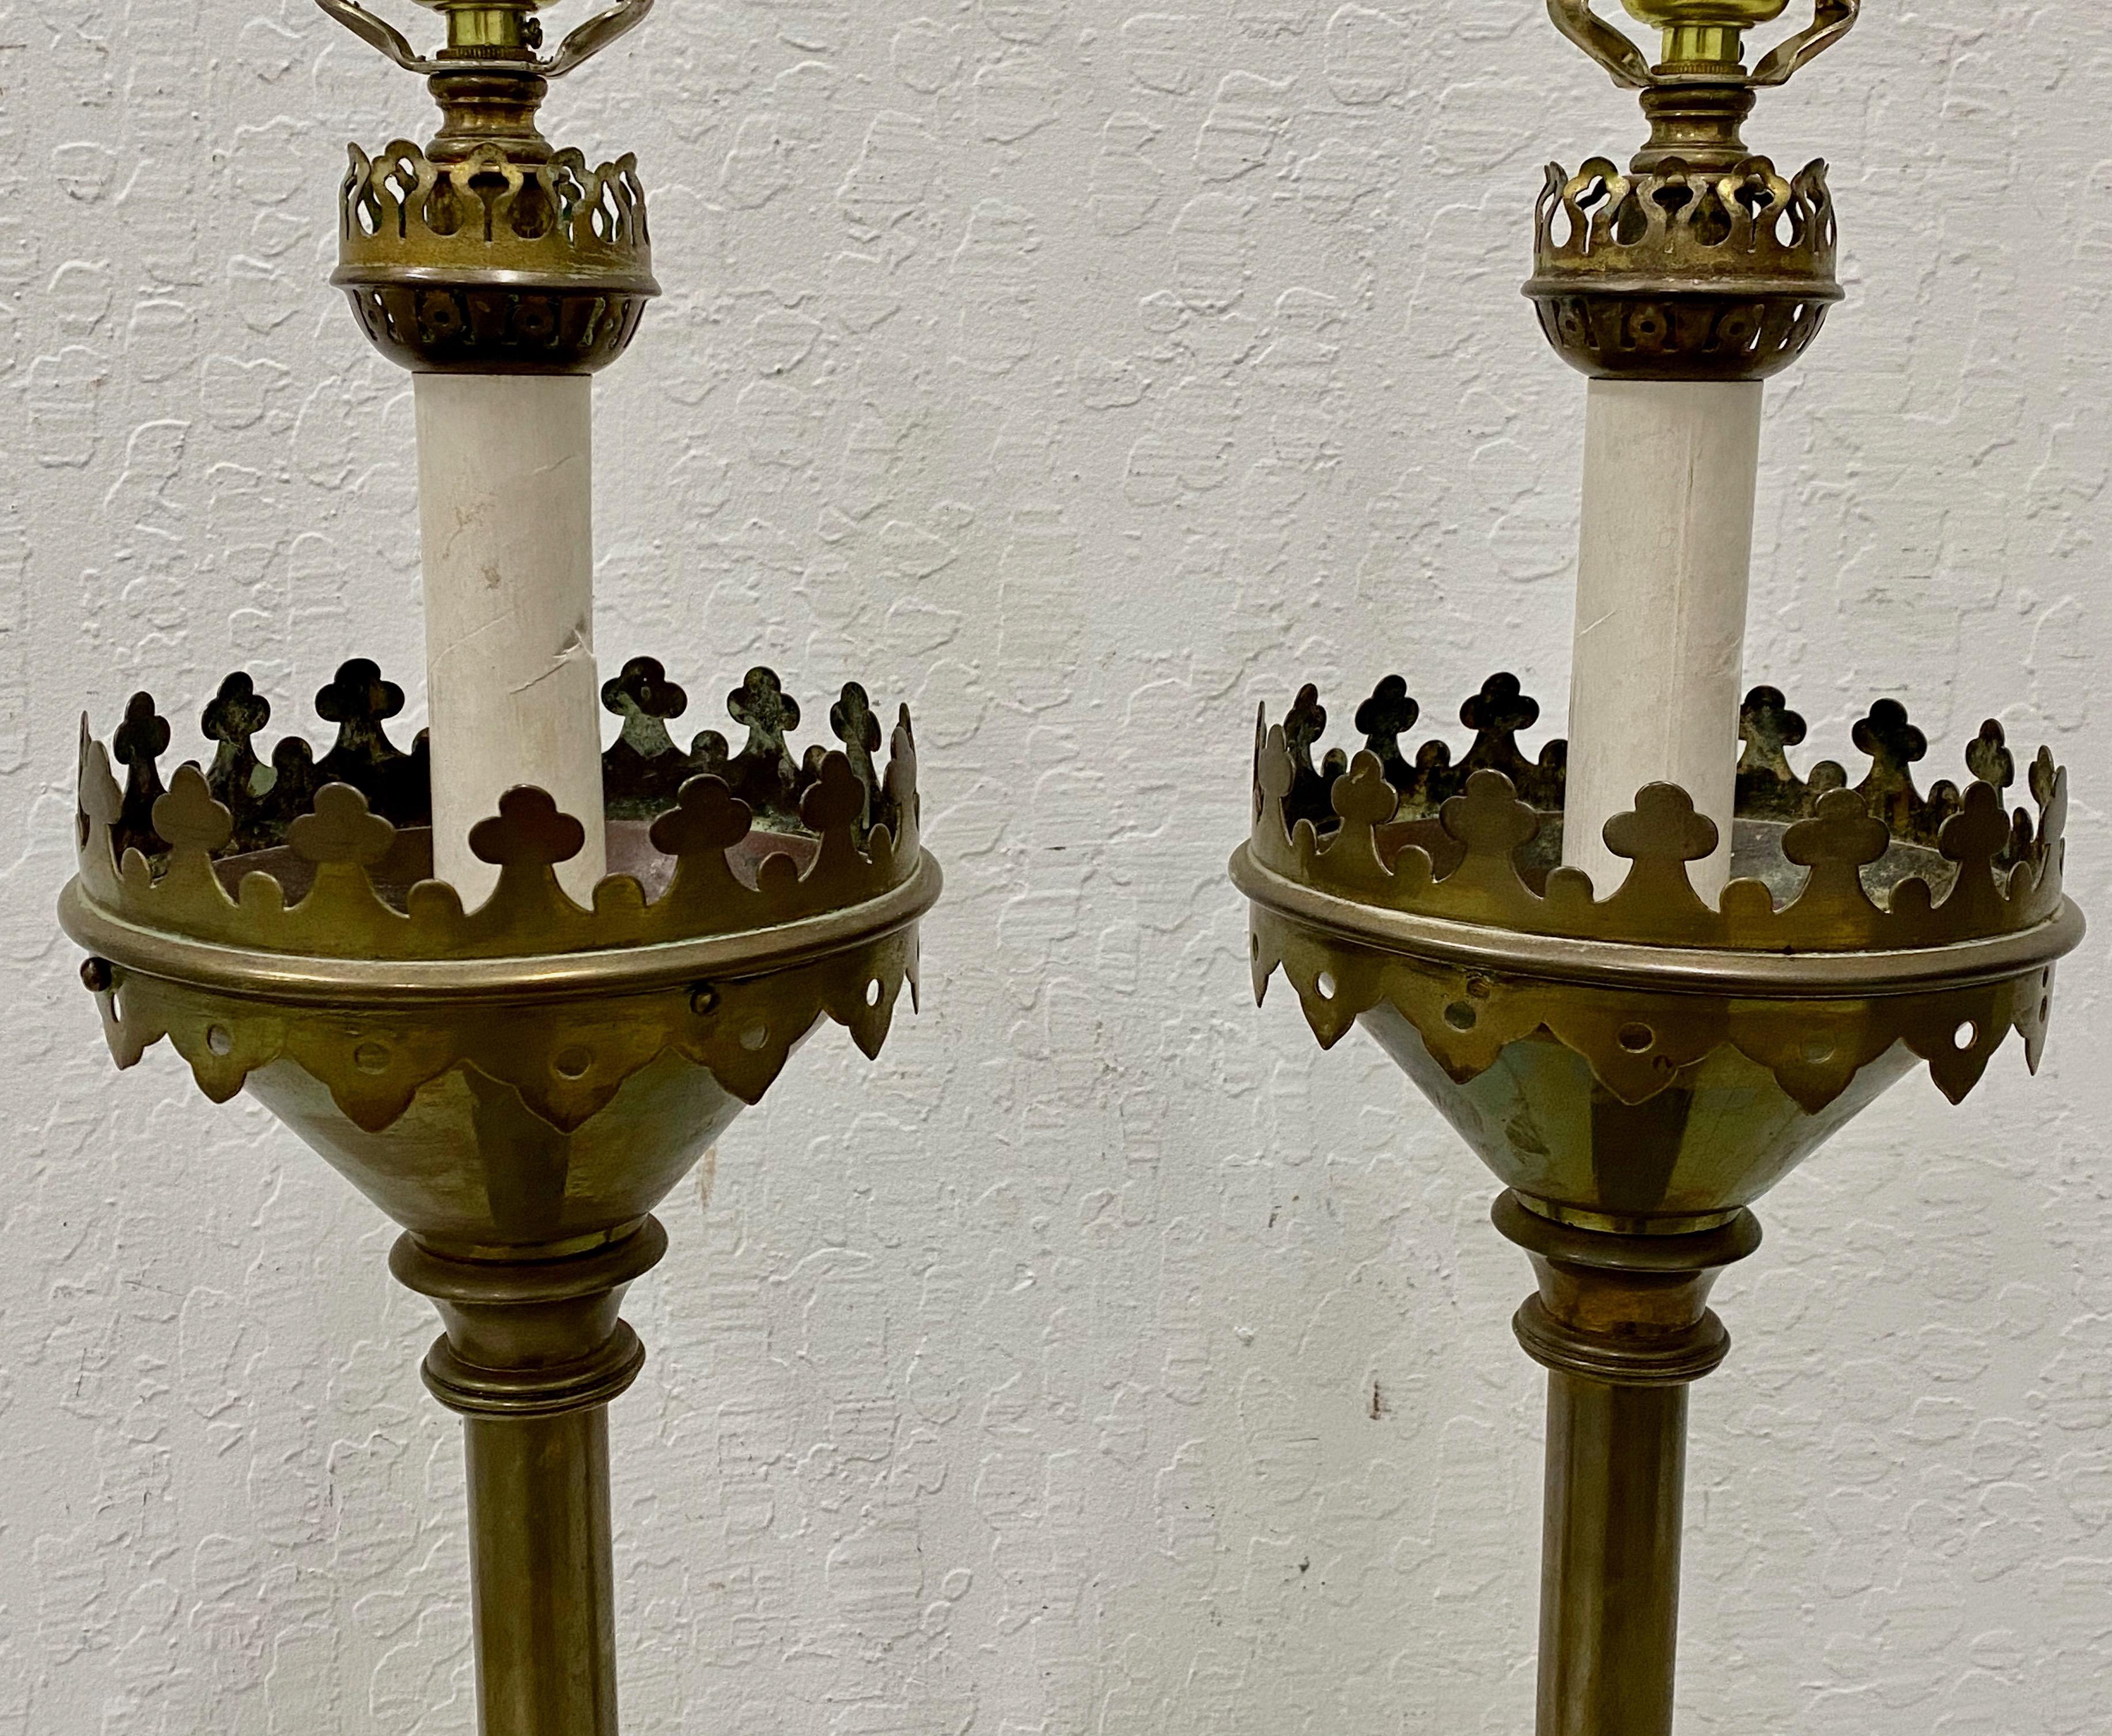 Hammered Pair of Gothic Antique Bronze Table Lamps, 19th Century